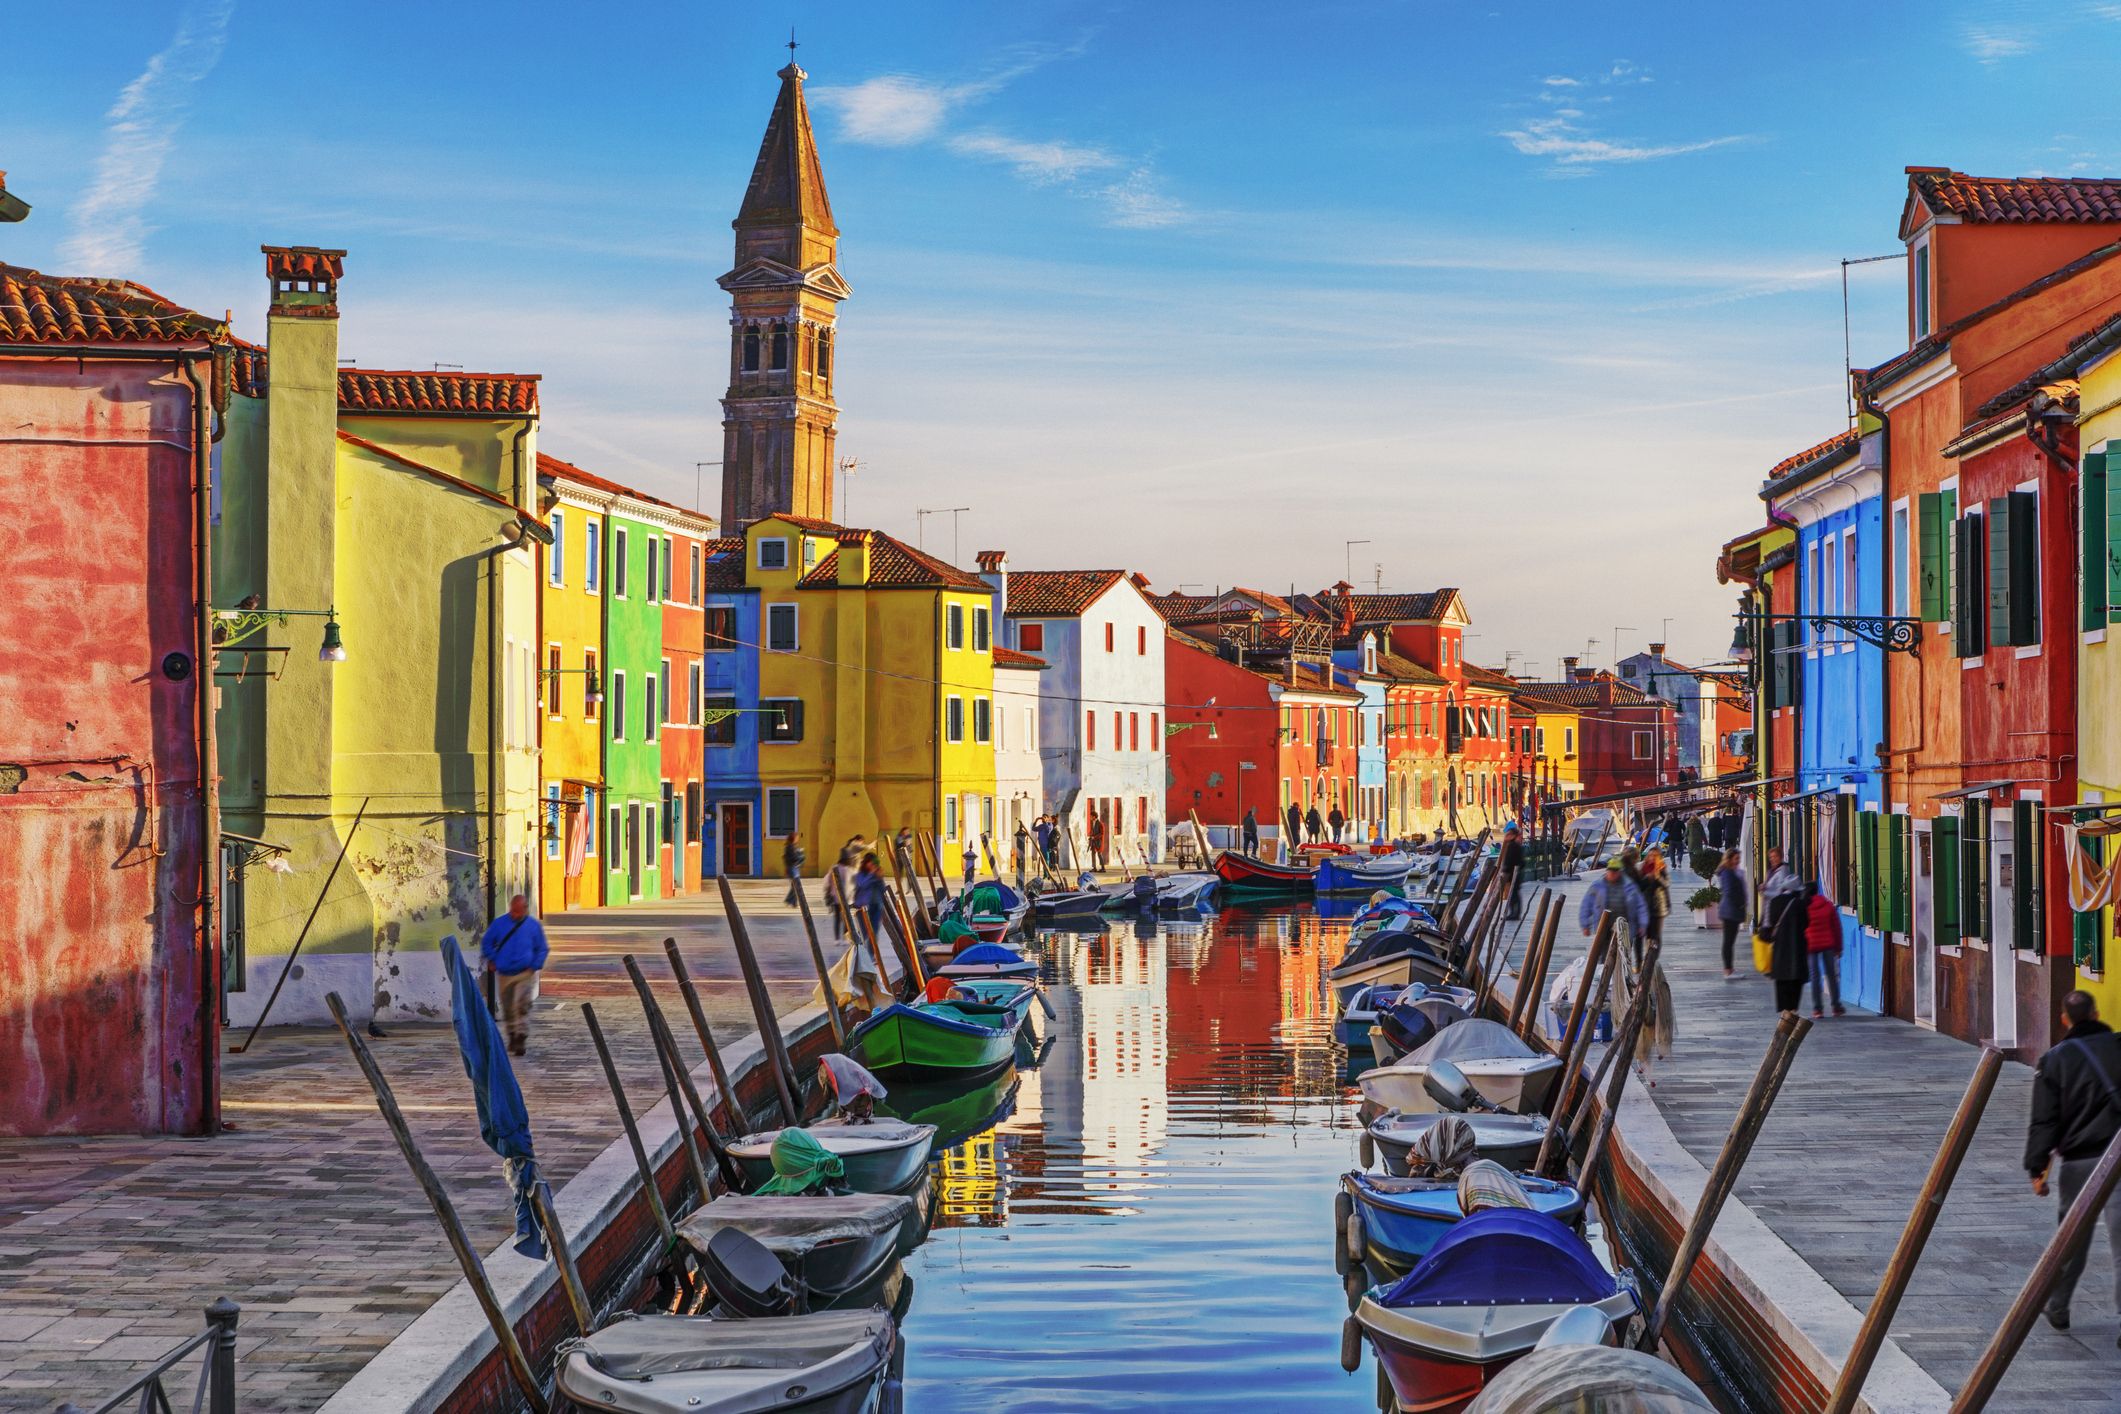 <p>It's hard to overstate the beauty of <a href="https://www.goodhousekeeping.com/uk/lifestyle/travel/g38960124/best-hotels-venice/">Venice</a>, <a href="https://www.goodhousekeeping.com/uk/italy-holidays/">Italy</a>'s famous floating city. Up there with <a href="https://www.goodhousekeeping.com/uk/lifestyle/travel/g45469328/best-rome-hotels/">Rome</a> and <a href="https://www.goodhousekeeping.com/uk/lifestyle/travel/g28406616/hotels-in-paris-france/">Paris</a> as one of the world's most romantic spots, much has been written about this captivating city, as well as the Venice islands nearby. </p><p>Just as deserving of discerning travellers' attention, the islands close to <a href="https://www.goodhousekeeping.com/uk/lifestyle/travel/a46207889/explore-venice-by-cruise/">Venice</a> make for varied and adventurous holiday spots, whether for day trips during your stay in <em>La Serenissima </em>or alternatives to the city itself. From well-known Murano and Burano to more undiscovered spots like Torcello and Chioggia, there's so much to explore here beyond the city. You might want to plan your own route – or you could let someone else do the hard work and take a tour.</p><p>Best of all, you could tour the islands of <a href="https://www.goodhousekeeping.com/uk/lifestyle/travel/g25905524/venice-hidden-gems-unusual-attractions/">Venice</a> on an unforgettable cruise, like <em><a href="https://www.goodhousekeepingholidays.com/tours/islands-cruise-venice">Good Housekeeping</a></em><a href="https://www.goodhousekeepingholidays.com/tours/islands-cruise-venice">'s eight-day cruise</a> around the impossibly picturesque Venetian Lagoon. This journey through the labyrinthine canals and peaceful waterways takes place aboard luxurious river boat <em>SS La Venezia</em>. It begins in Venice itself, where you'll get VIP access to top sites like the Doge's Palace, as well as a private after-hours visit of Saint Marks Basilica.</p><p><a class="body-btn-link" href="https://www.goodhousekeepingholidays.com/tours/islands-cruise-venice">DISCOVER THE VENICE ISLANDS WITH GH</a></p><p>Then, it's off for your choice of excursions, including trips to the best islands near Venice, including Mazzorbo, Burano and Murano, where you'll get to see live glass blowing. </p><p>Another exciting option is an <a href="https://www.goodhousekeepingholidays.com/tours/venice-james-martin">eight-day cruise around the Venice islands with chef James Martin</a>, who will join you on board for a talk and to cook a divine gala dinner one evening. You'll get to explore the pretty waterfront shops, colourful facades and peaceful canals that are unique to Burano, Mazzorbo and Torcello, as well as straying a little further to Chioggia, a southern port frequented by fishermen.</p><p><a class="body-btn-link" href="https://www.goodhousekeepingholidays.com/tours/venice-james-martin">TASTE THE VENICE ISLANDS WITH GH & JAMES MARTIN</a></p><p>There's also the chance to explore the Venice islands on another cruise with a difference. As well as the opportunity to explore Venice's most famous sites and cruise around the islands nearby, this eight-day cruise includes an incredible, intimate performance from <a href="https://www.goodhousekeepingholidays.com/tours/russell-watson-venice">Russell Watson</a>, one of the UK's best-selling classical artists.</p><p><a class="body-btn-link" href="https://www.goodhousekeepingholidays.com/tours/russell-watson-venice">EXPLORE VENICE WITH GH & RUSSELL WATSON</a></p><p>To help you decide which of these exclusive tours to book first, we've done a little exploring of our own to bring you a list of the best islands near Venice to discover this year...</p>